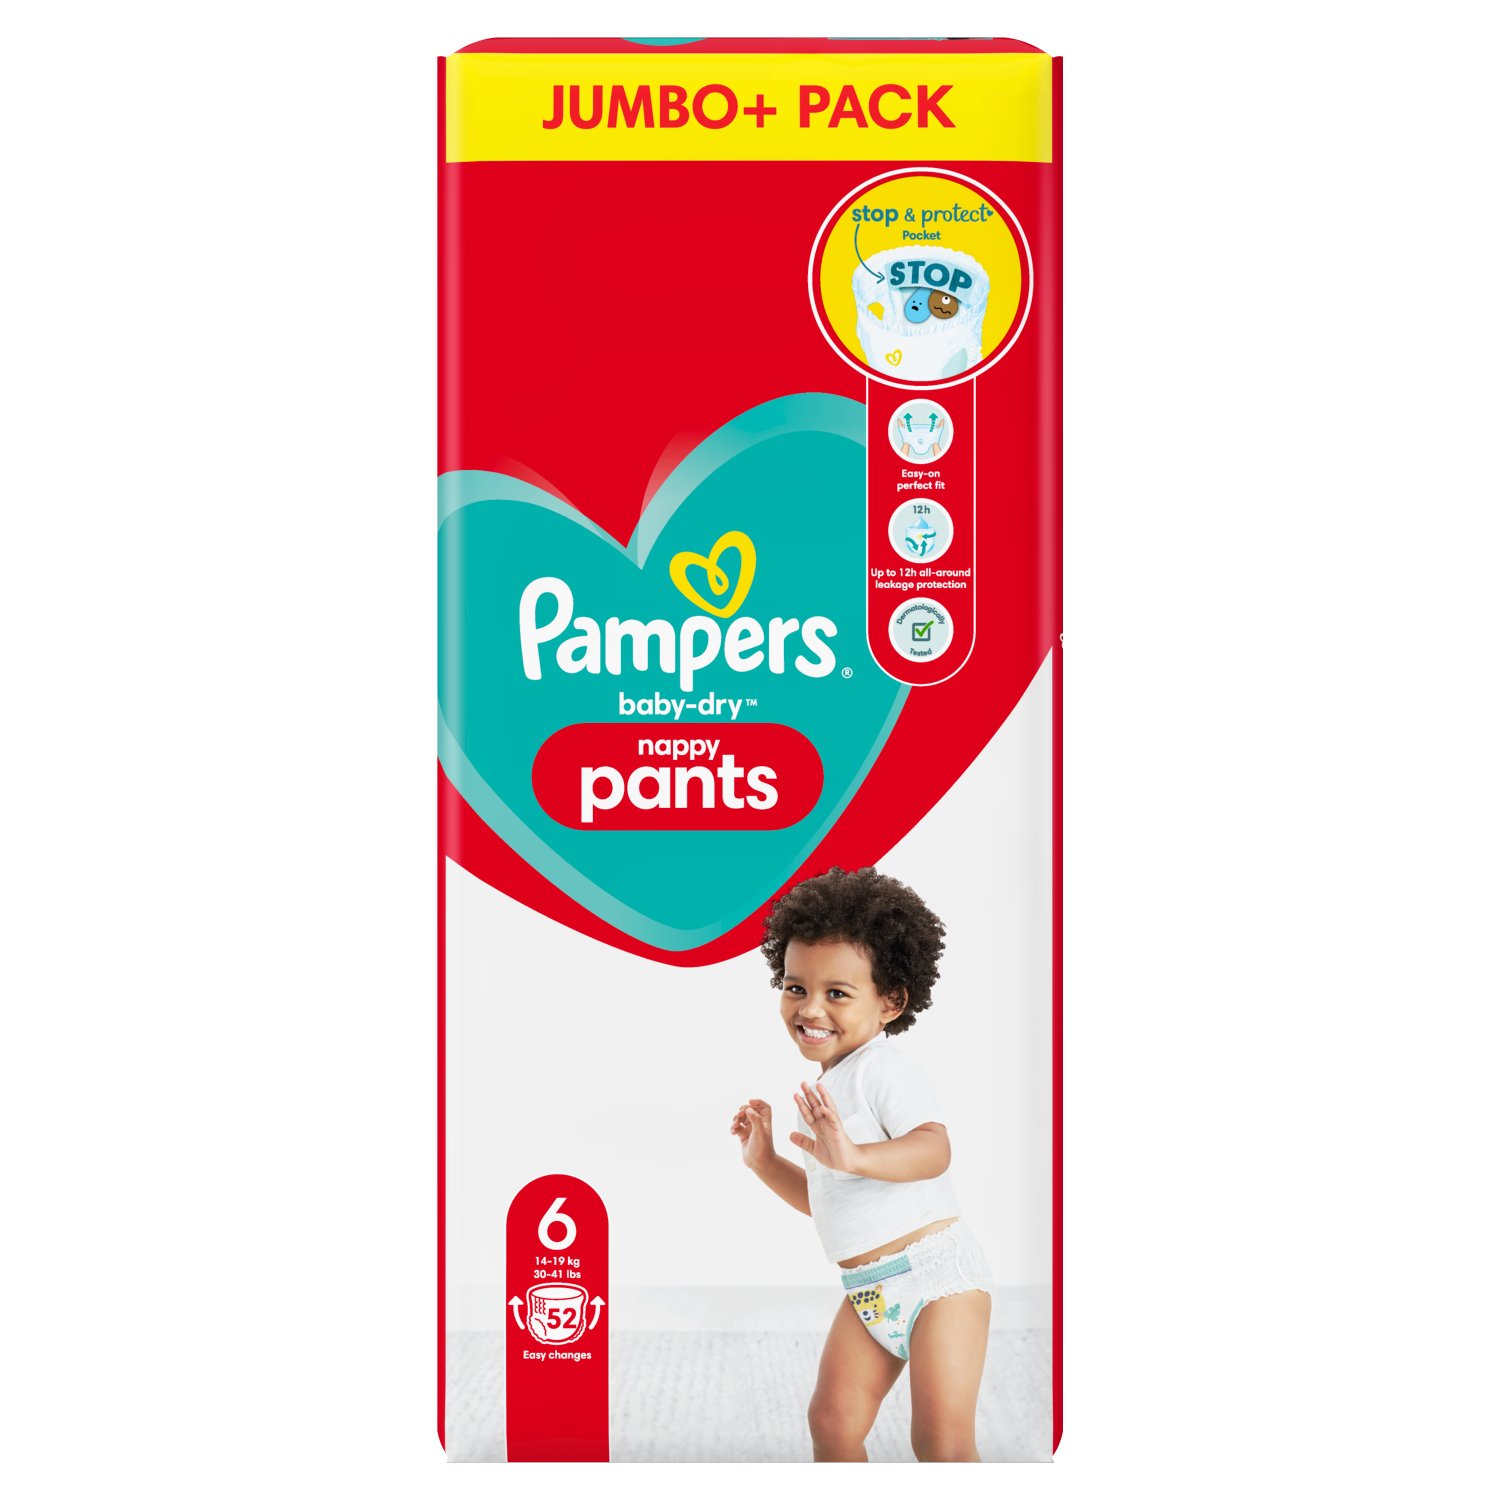 Pampers Baby-Dry Nappy Pants is the only nappy in the UK with STOP & PROTECT POCKET that combined with pants’ 360° Fit provides up to 12h of all-around leakage protection. They also have a super absorbent core that absorbs wetness instantly and double leg cuffs that help prevent leaks around the legs. When your baby starts to wriggle during changing time, Pampers Baby-Dry Nappy Pants are easy to change: with their flexible all-around waistband it’s just one pull to put on. Tear the sides for easy removal, roll up and secure with the tape for easy disposal. Just like you, Pampers put your baby’s safety first: Pampers Baby-Dry Nappy Pants are dermatologically tested and contain 0% EU perfume allergens (as regulated in the EU Cosmetics Regulation No 1223/2009). They are approved by the dermatologists of the Skin Health Alliance and tested and certified according to Standard 100 by Oekotex. Want to know more about the components ? Visit pampers.co.uk Use with Pampers Baby Wipes.